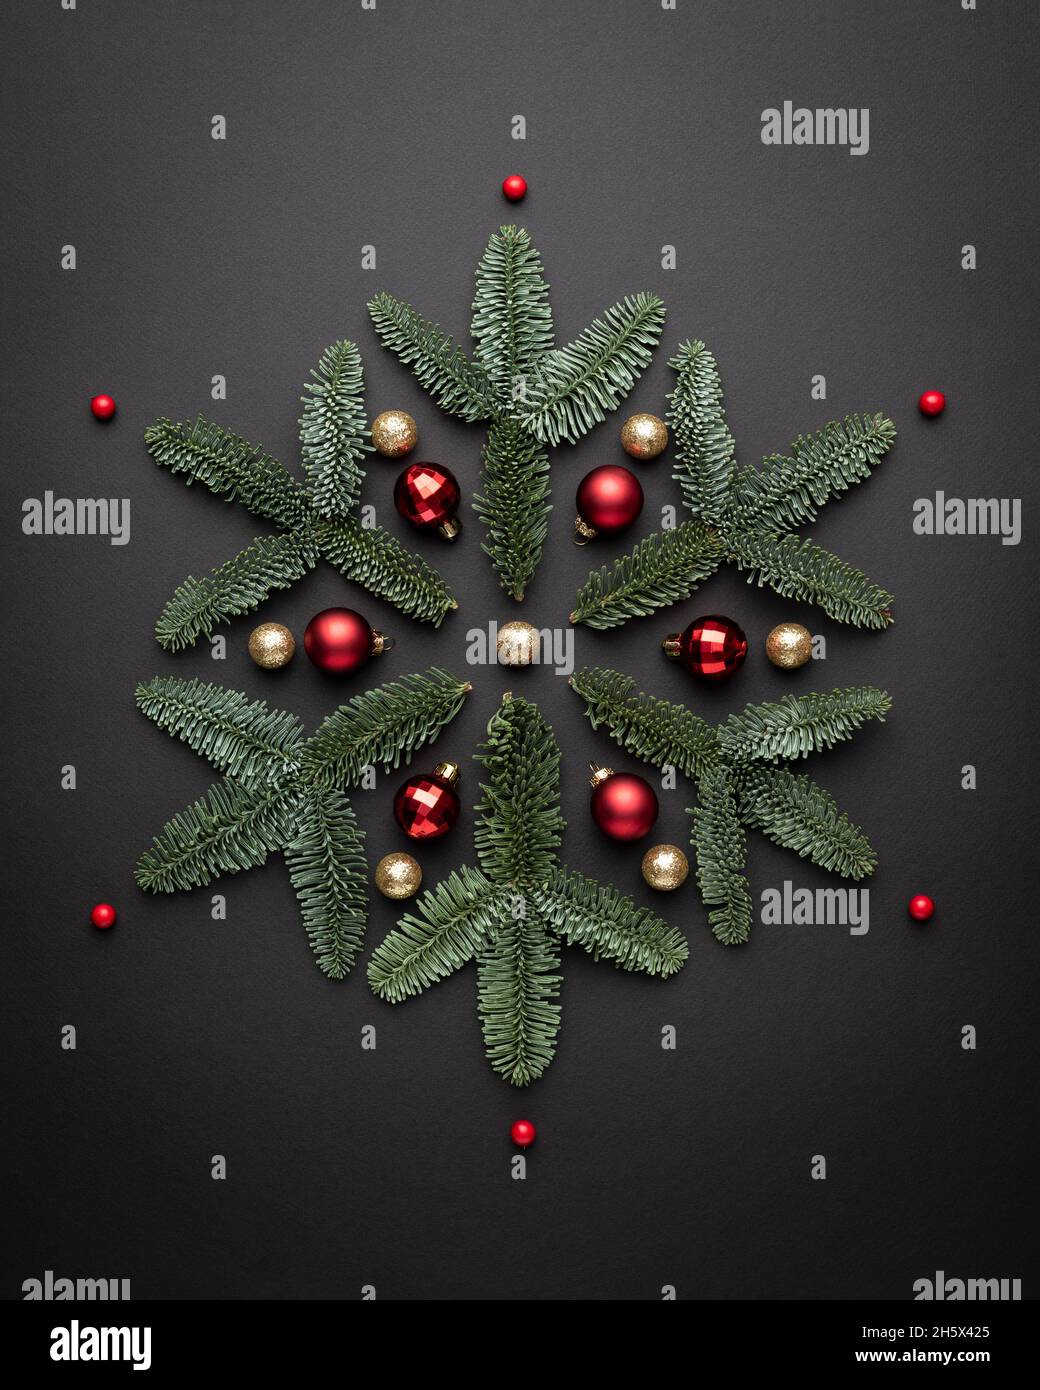 Christmas card with a decorative snowflake made of Christmas decorations and fir branches on a black background Stock Photo